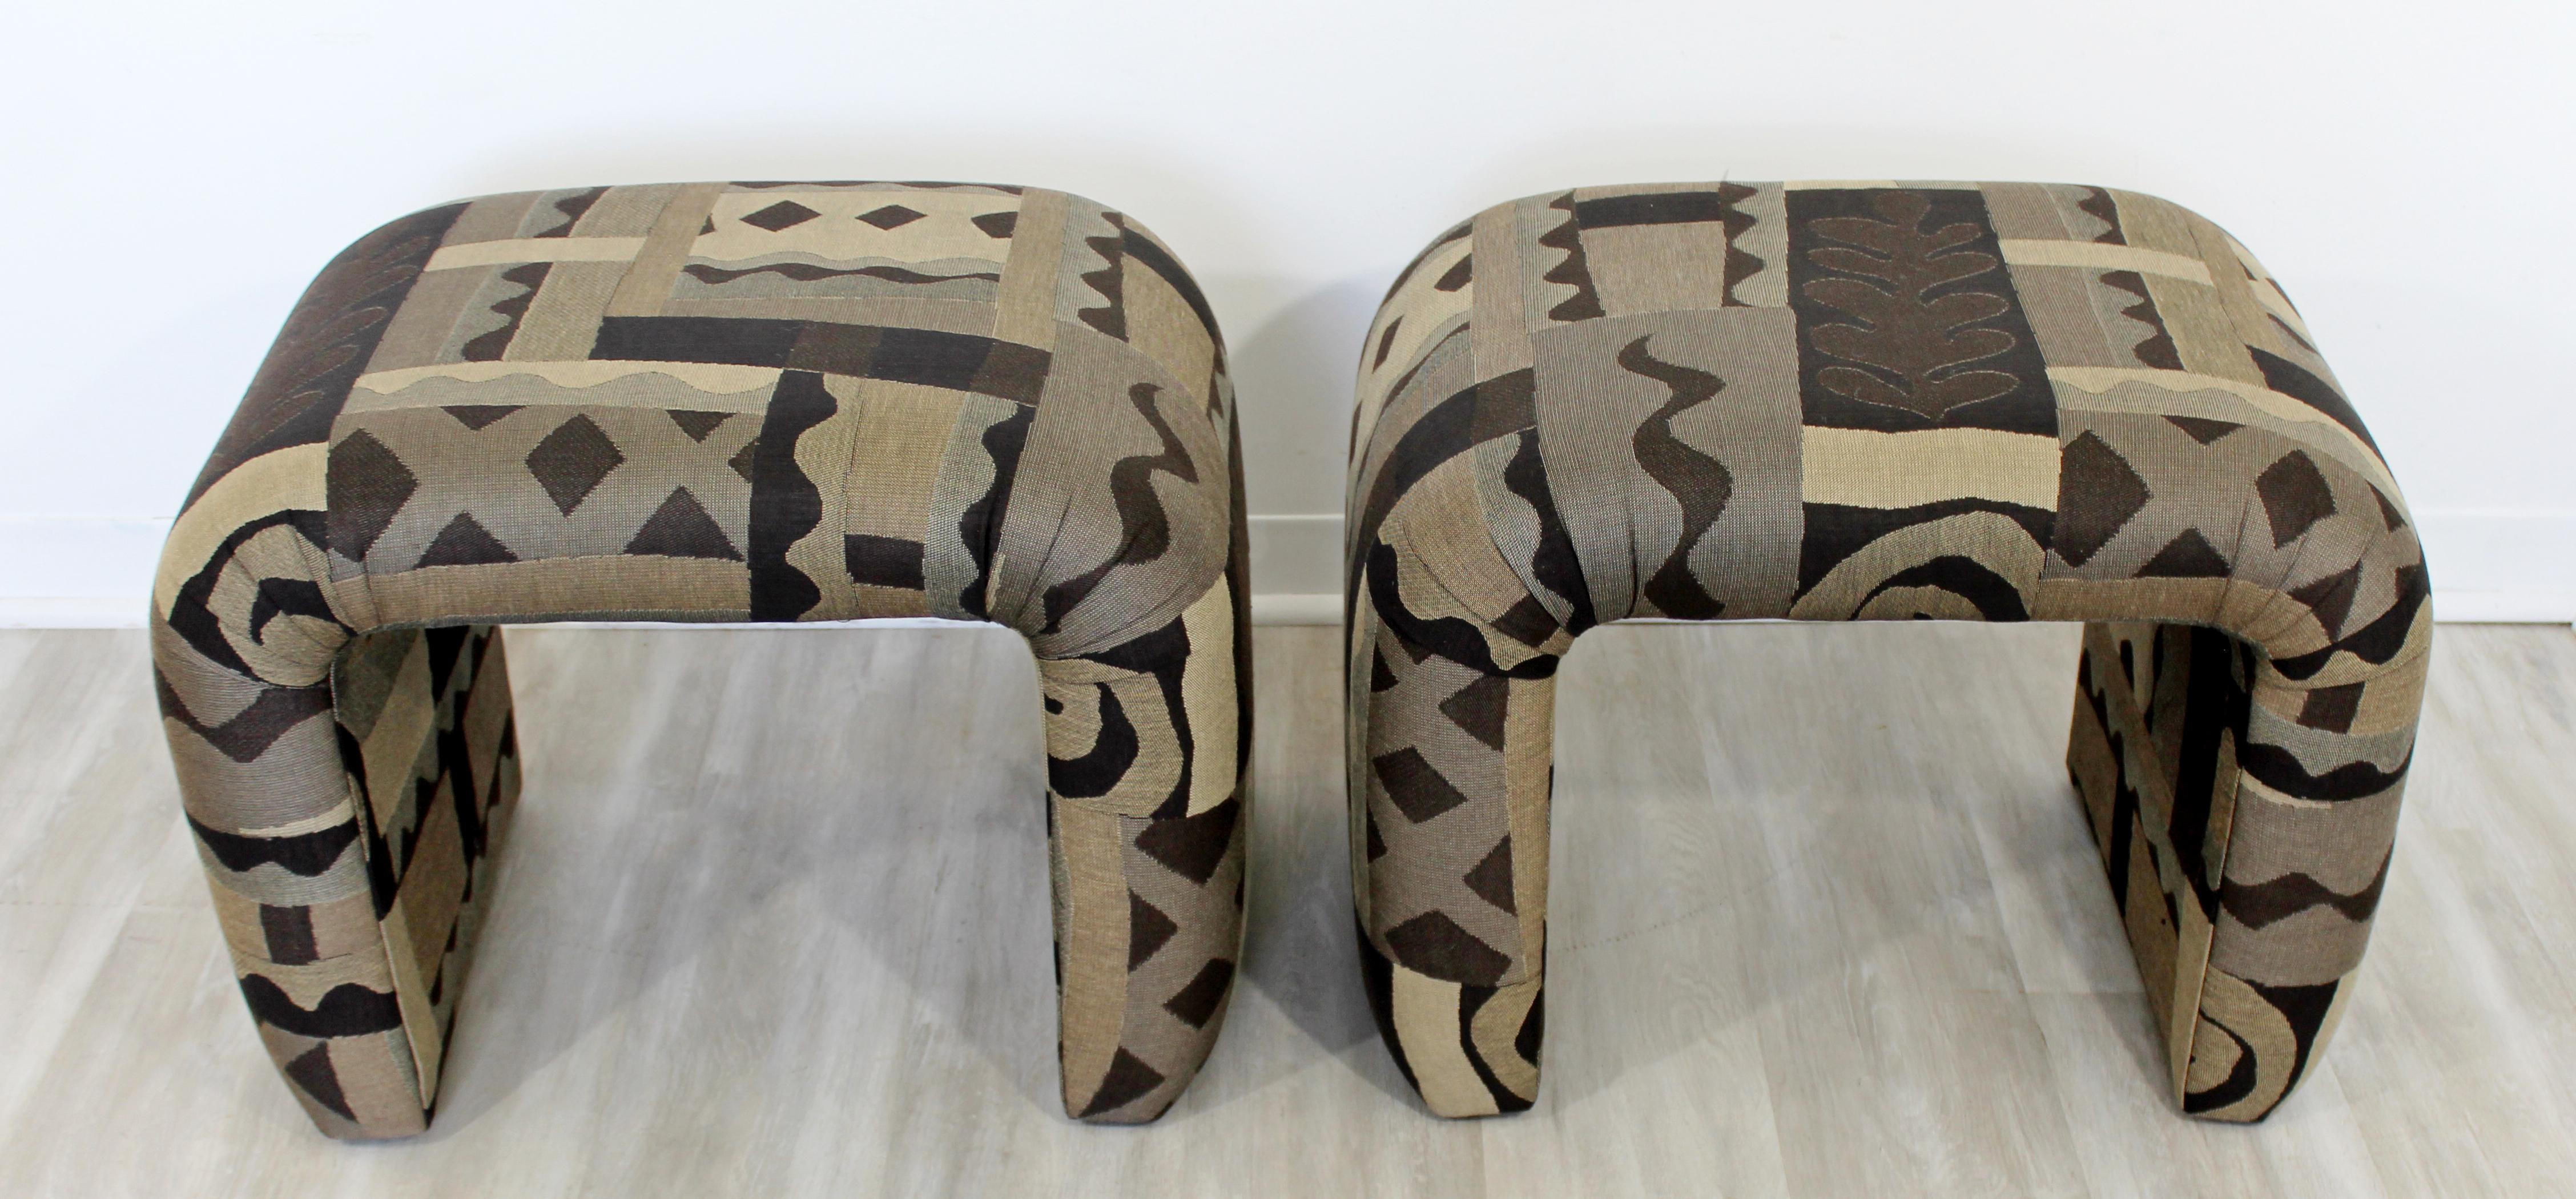 American Mid-Century Modern Pair of Waterfall Benches Stools Ottomans Milo Baughman Style